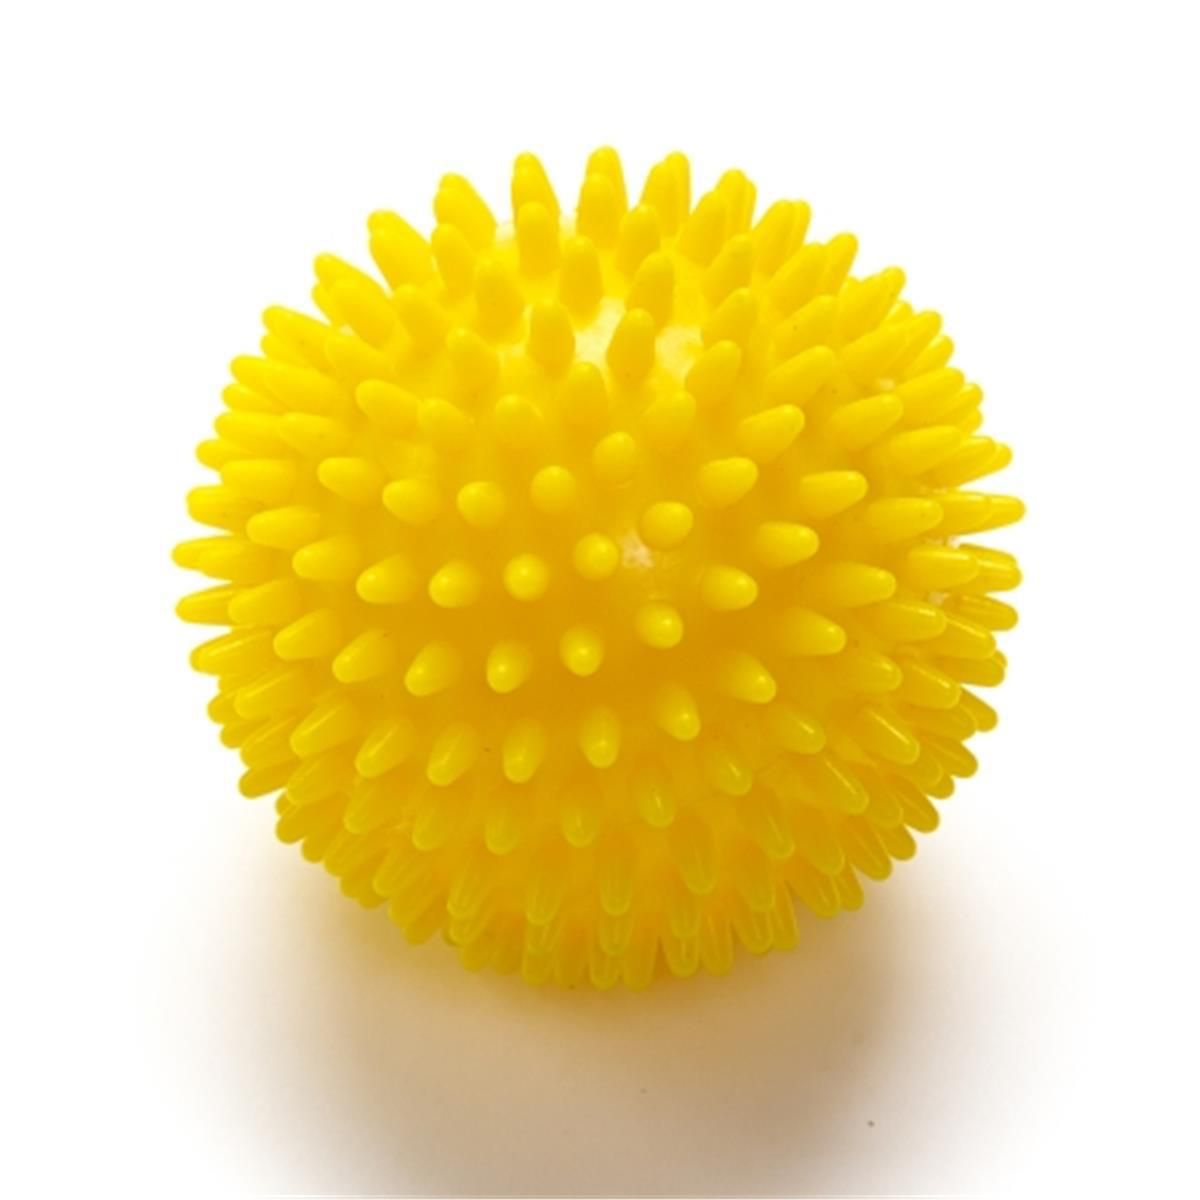 Image for HWR Deep Tissue Massage Ball with Spikes, Yellow at Kohl's.